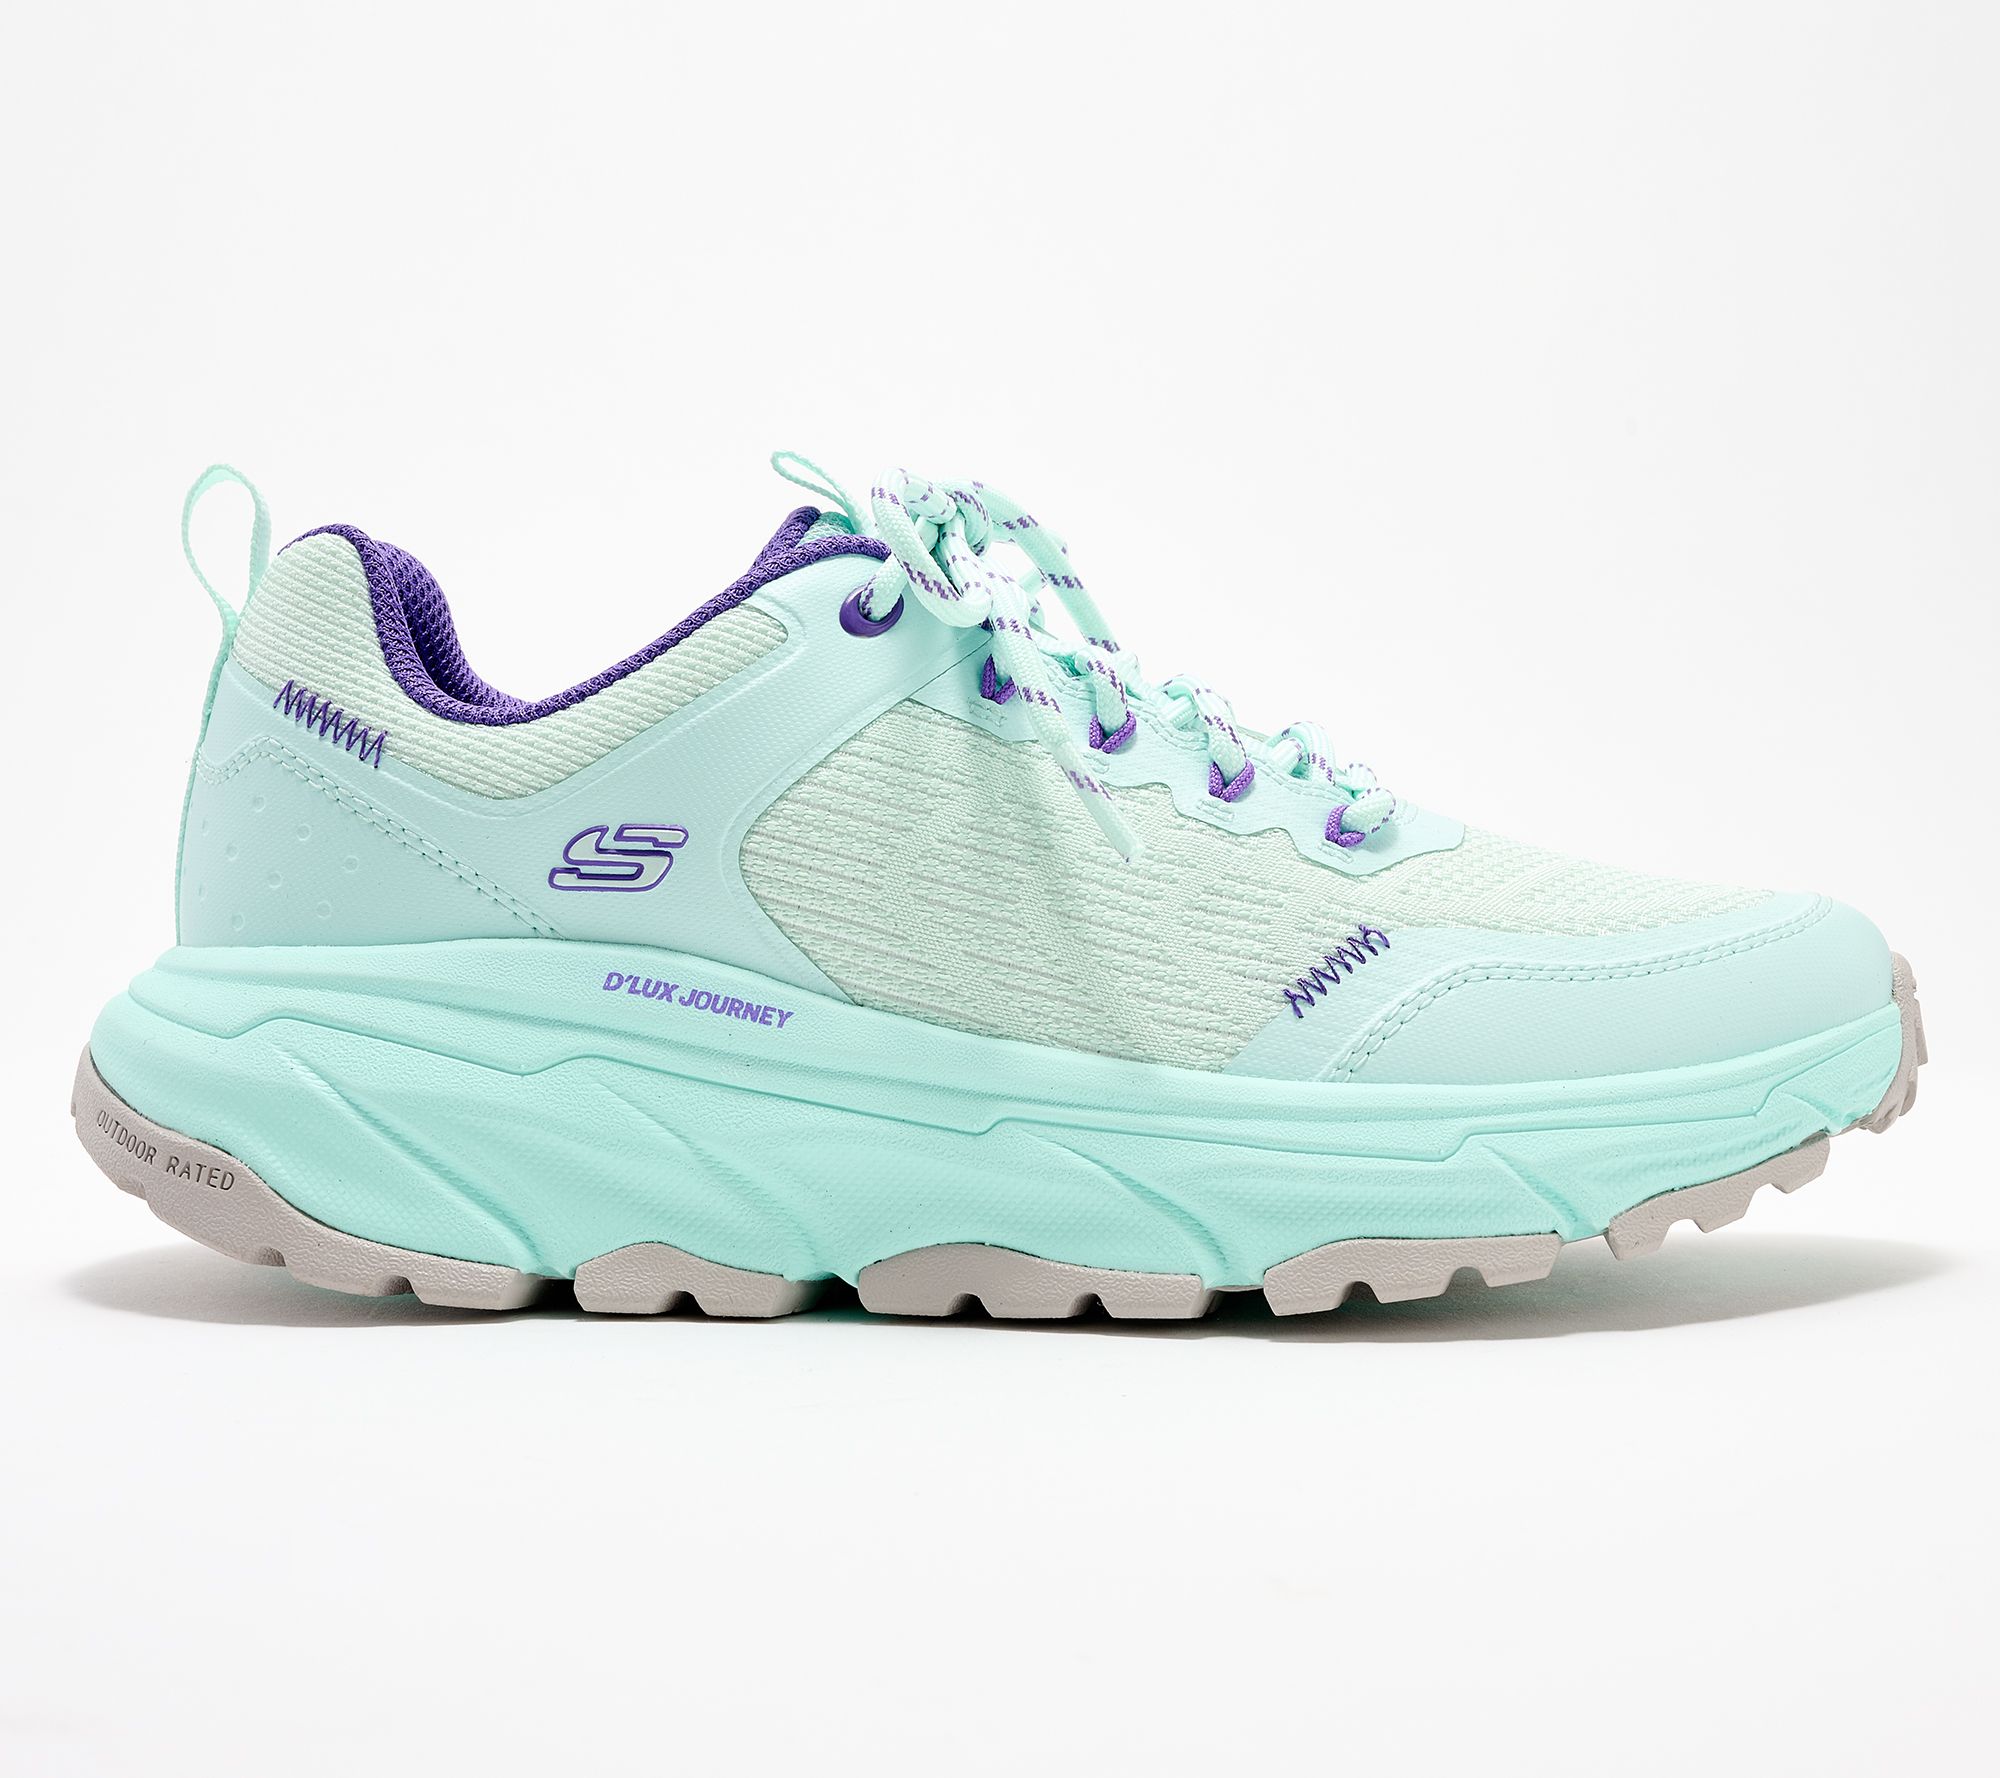 Skechers D'Lux Journey Knit Lace-Up Sneakers - Verbena